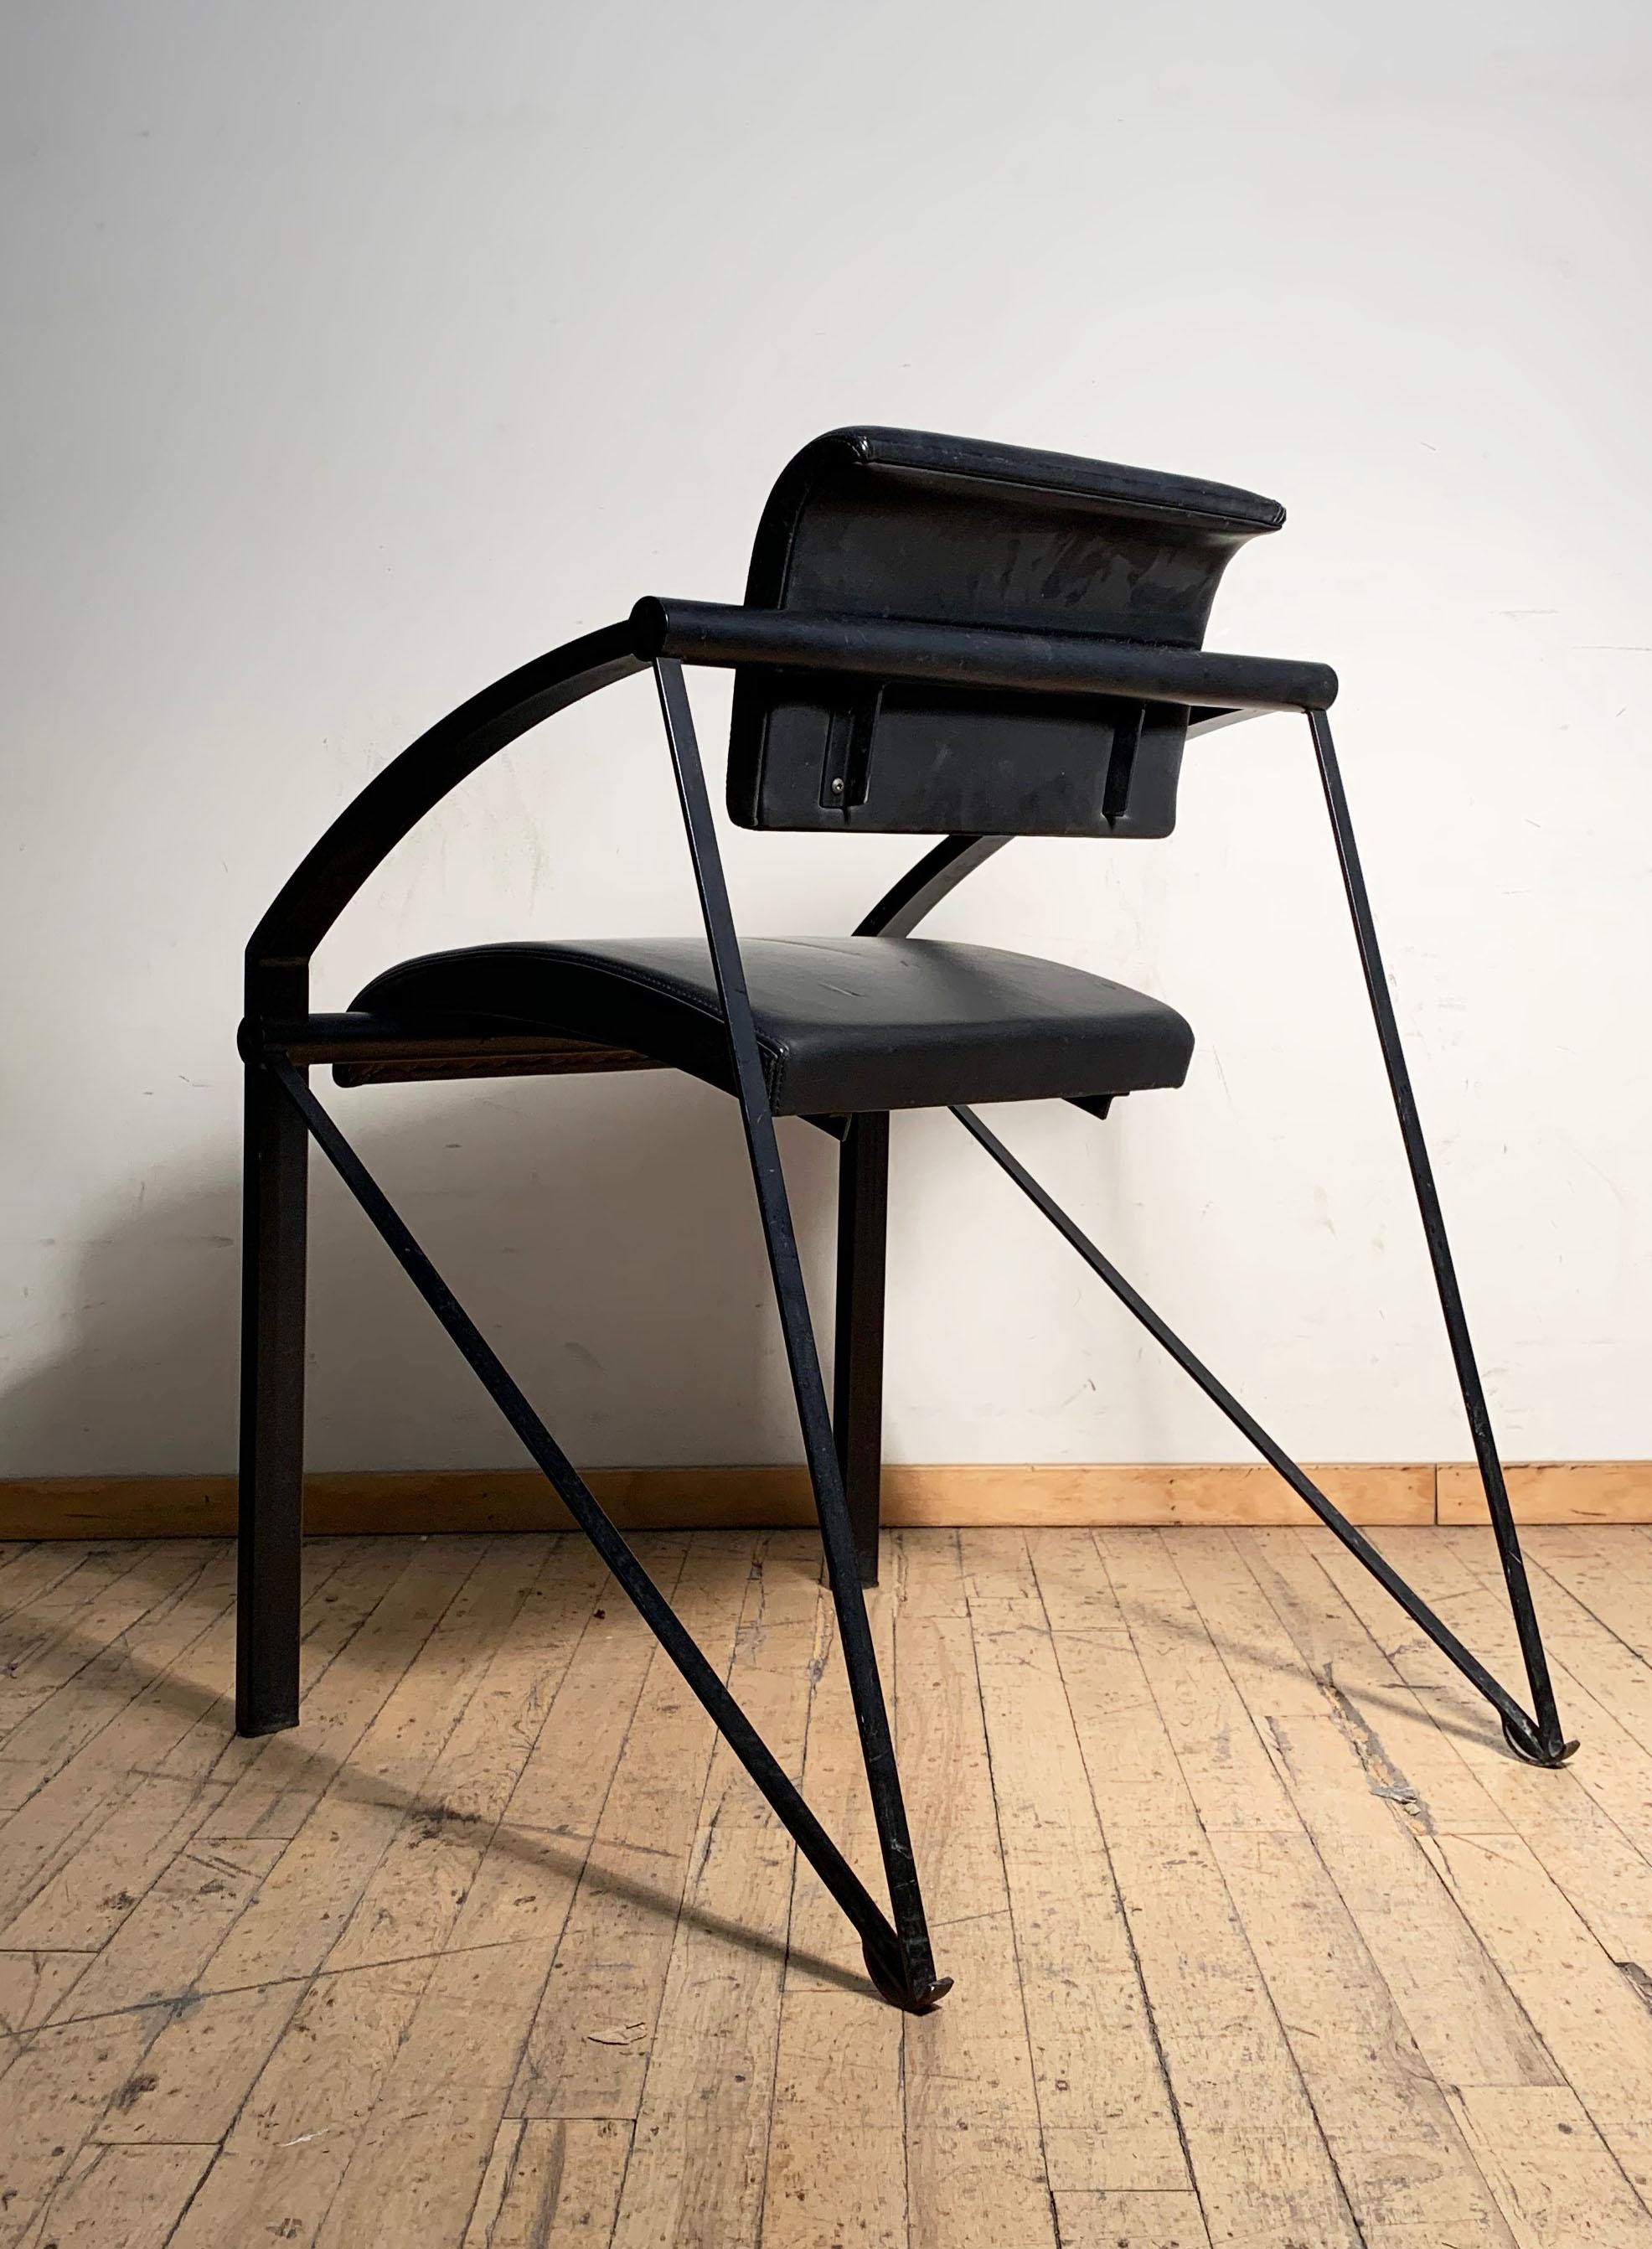 Pair of Steel Italian Memphis Architectural Chairs Attributed to Mario Botta For Sale 1